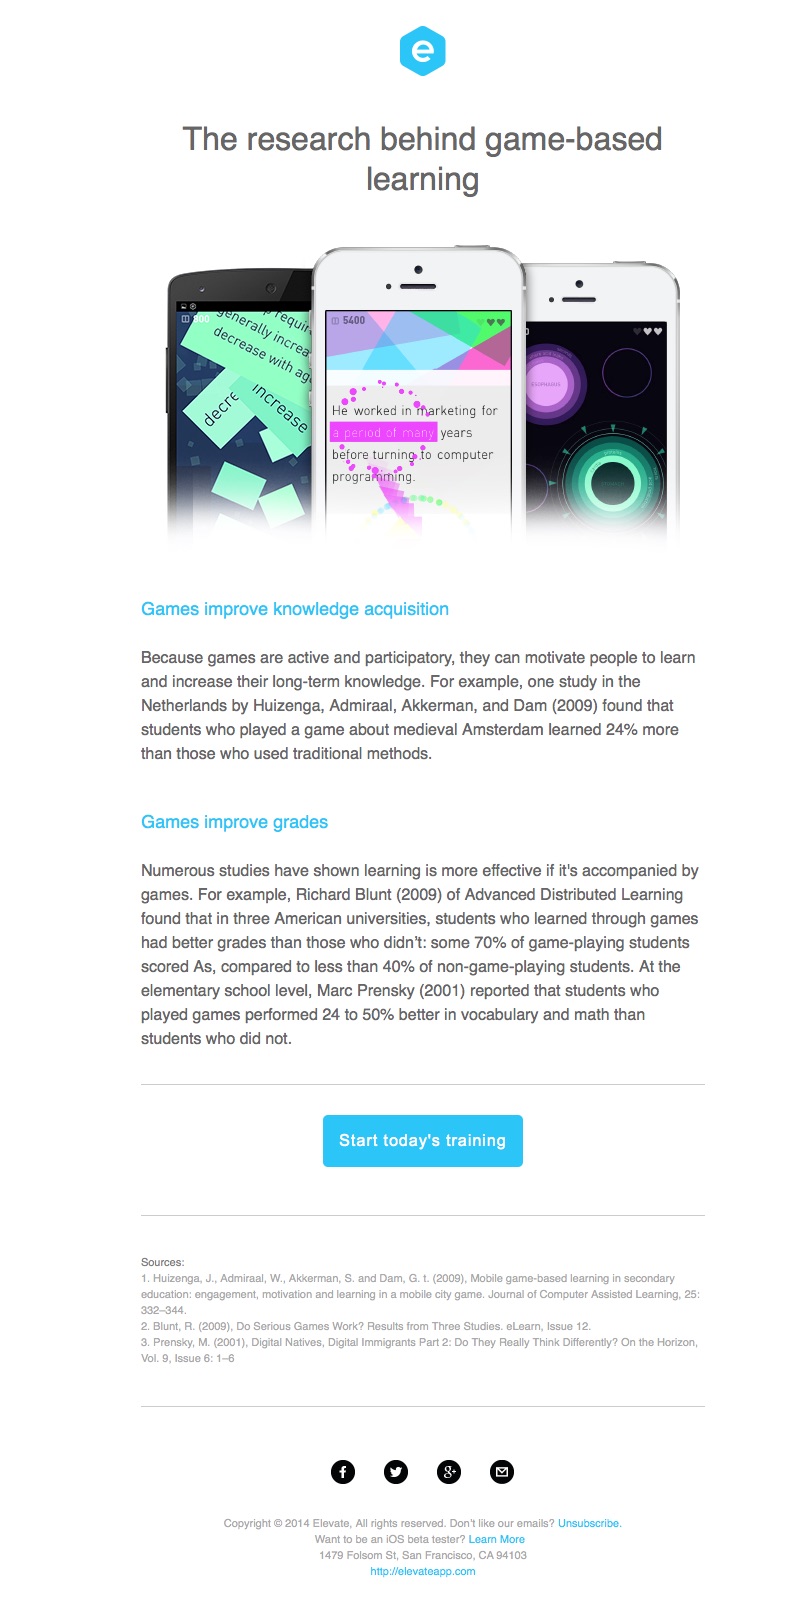 Elevate's email about game-based learning research